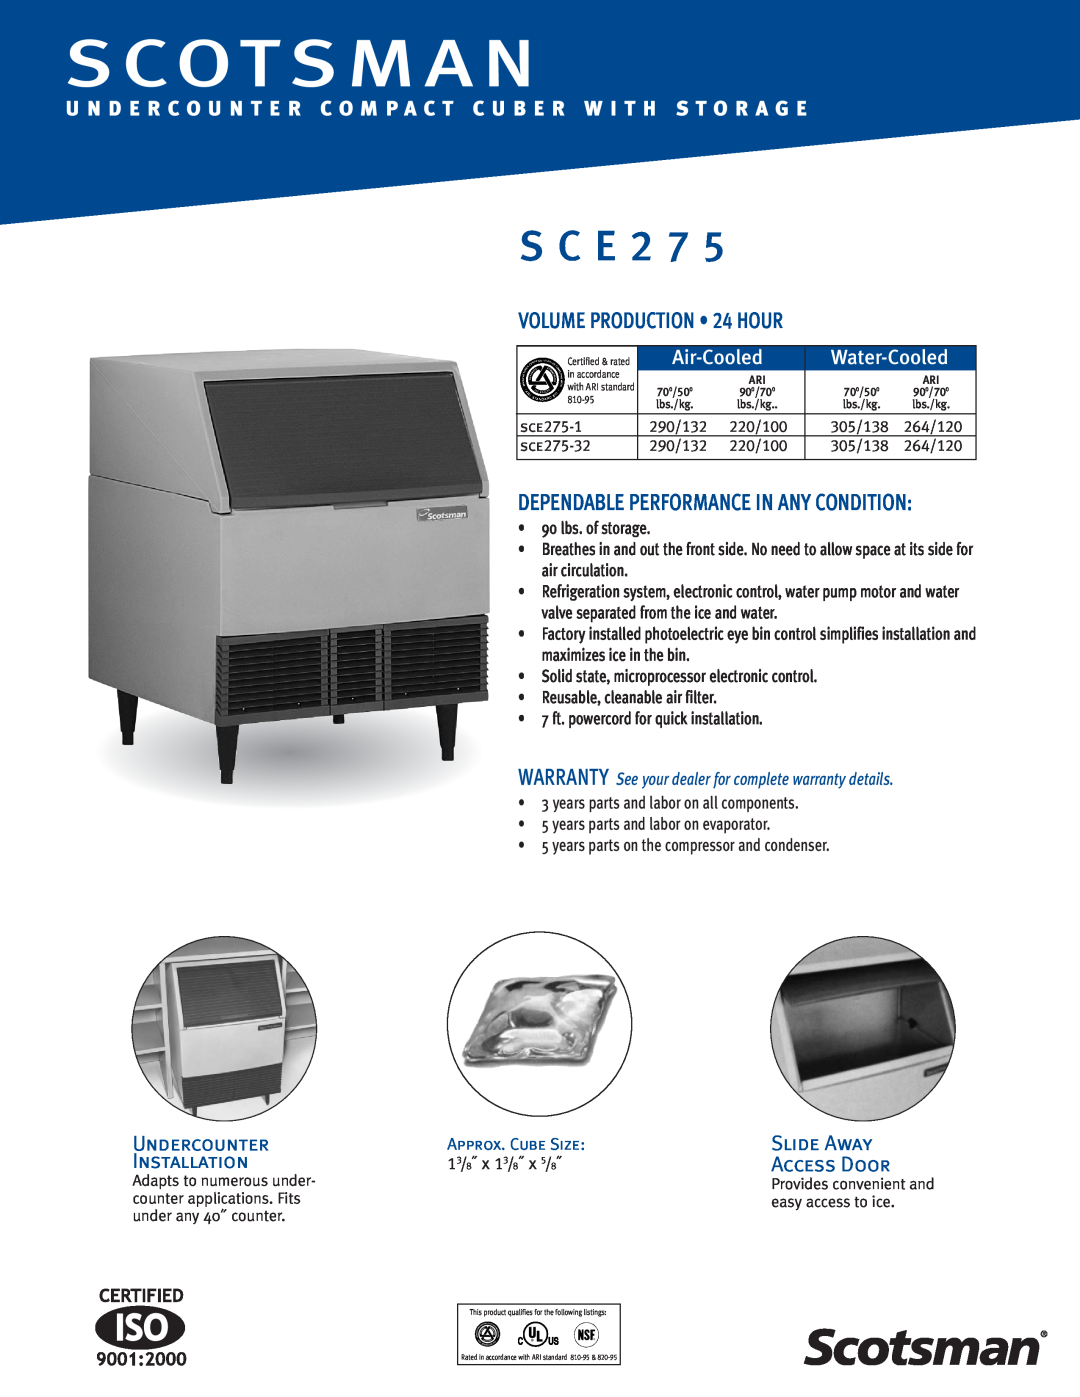 Scotsman Ice SCE275 warranty Approx. Cube Size, S Cot S M A N, S C E, VOLUME PRODUCTION 24 HOUR, Air-Cooled, Water-Cooled 